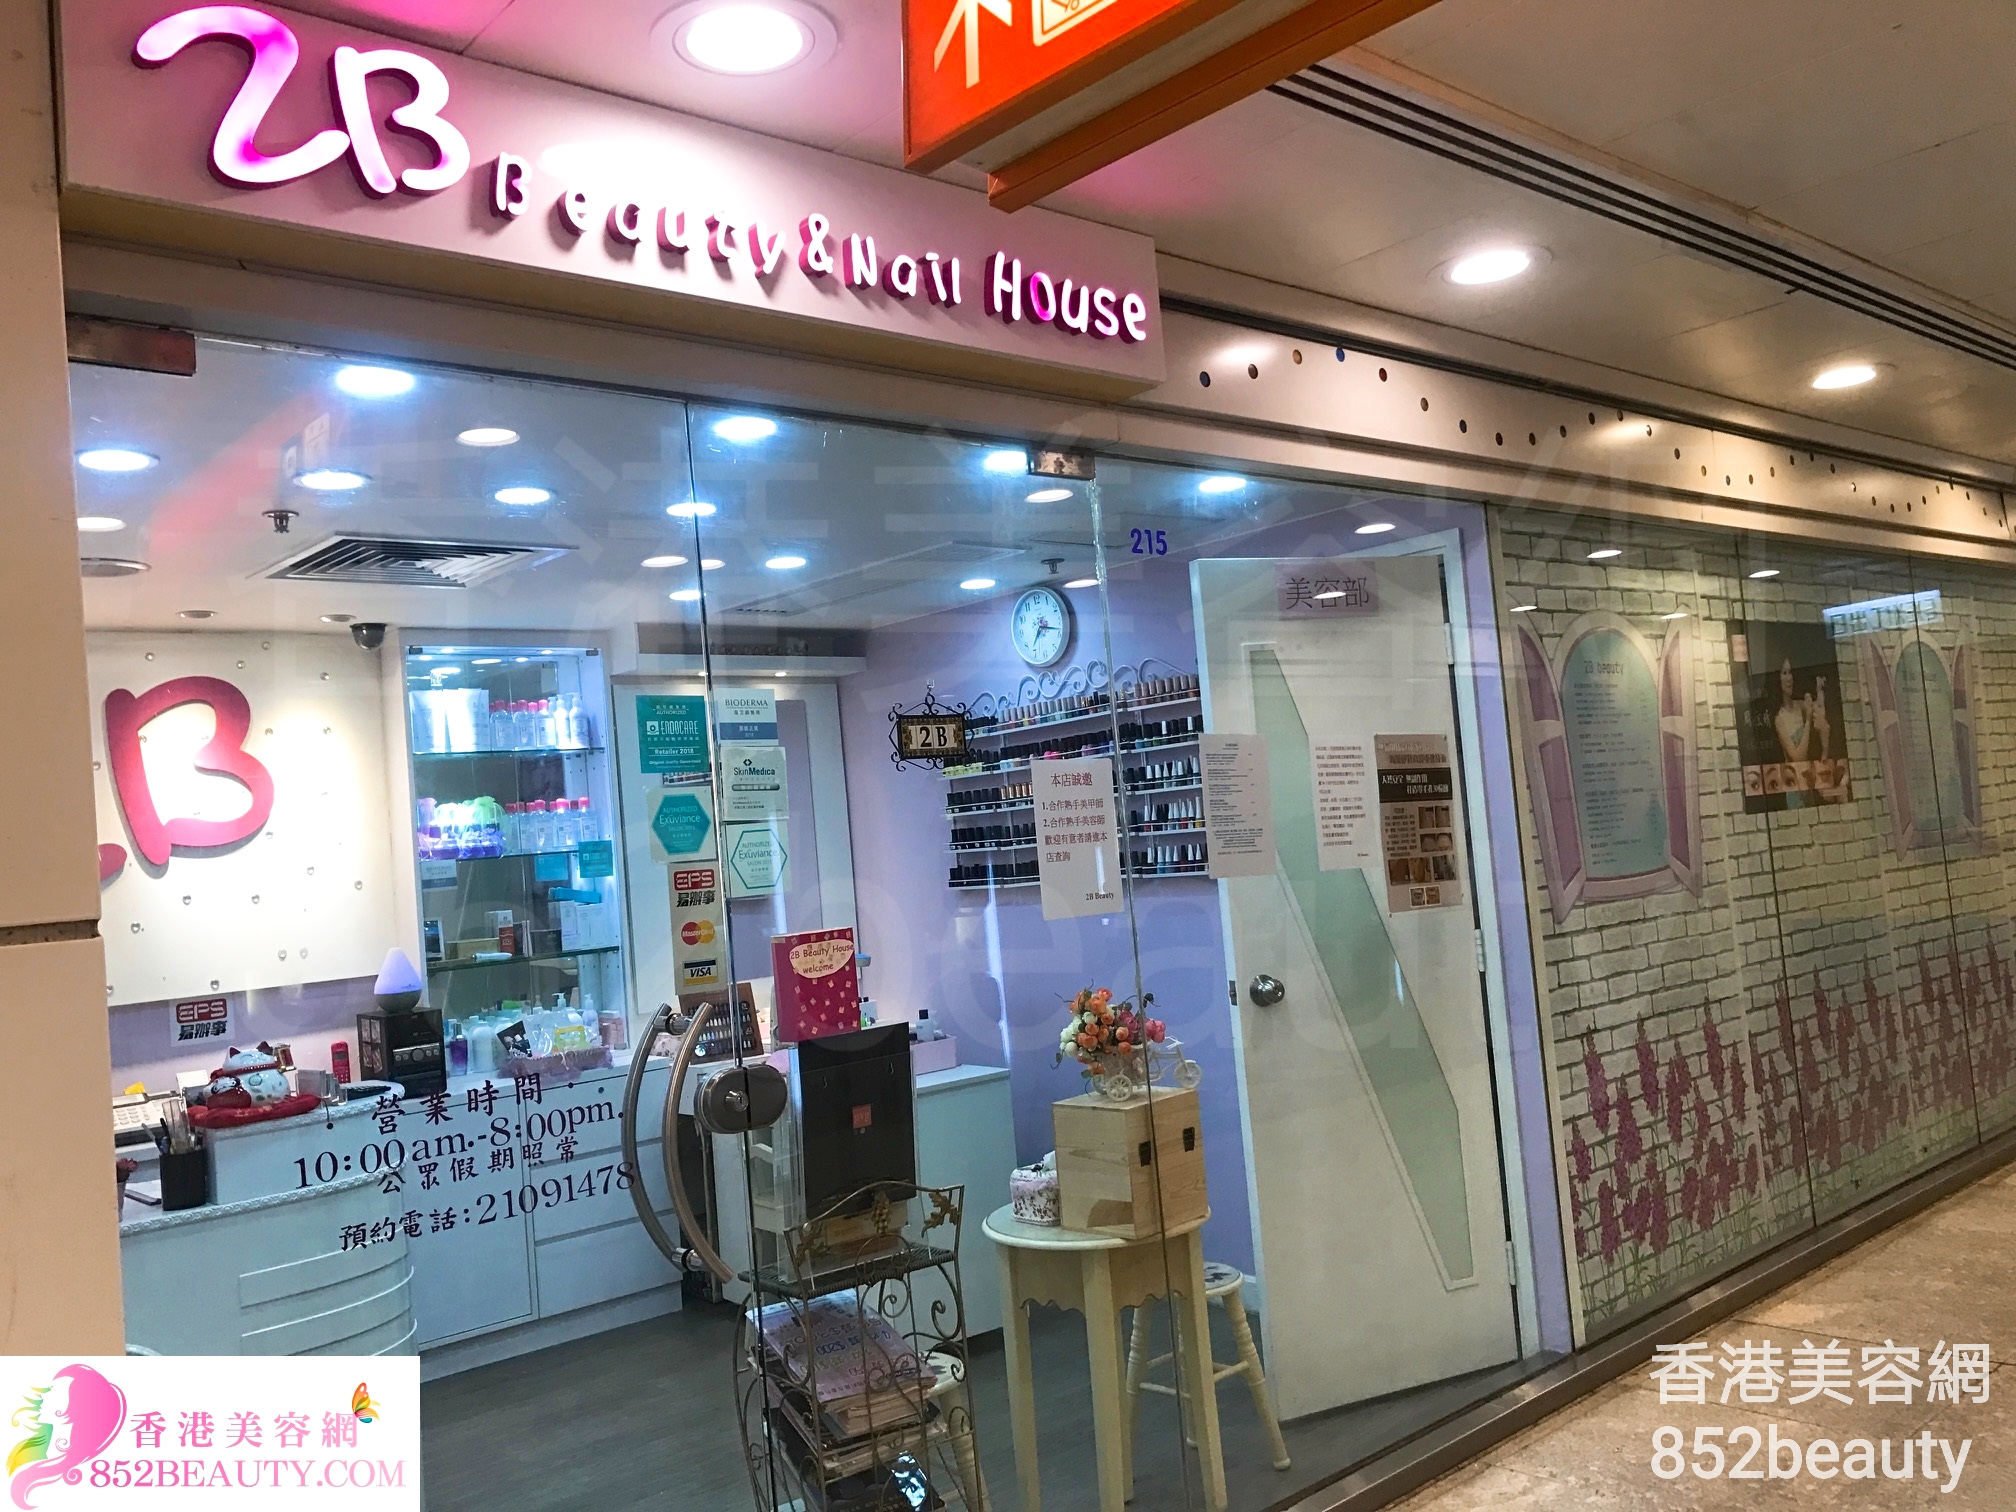 Hand and foot care: 2B Beauty & Nail House